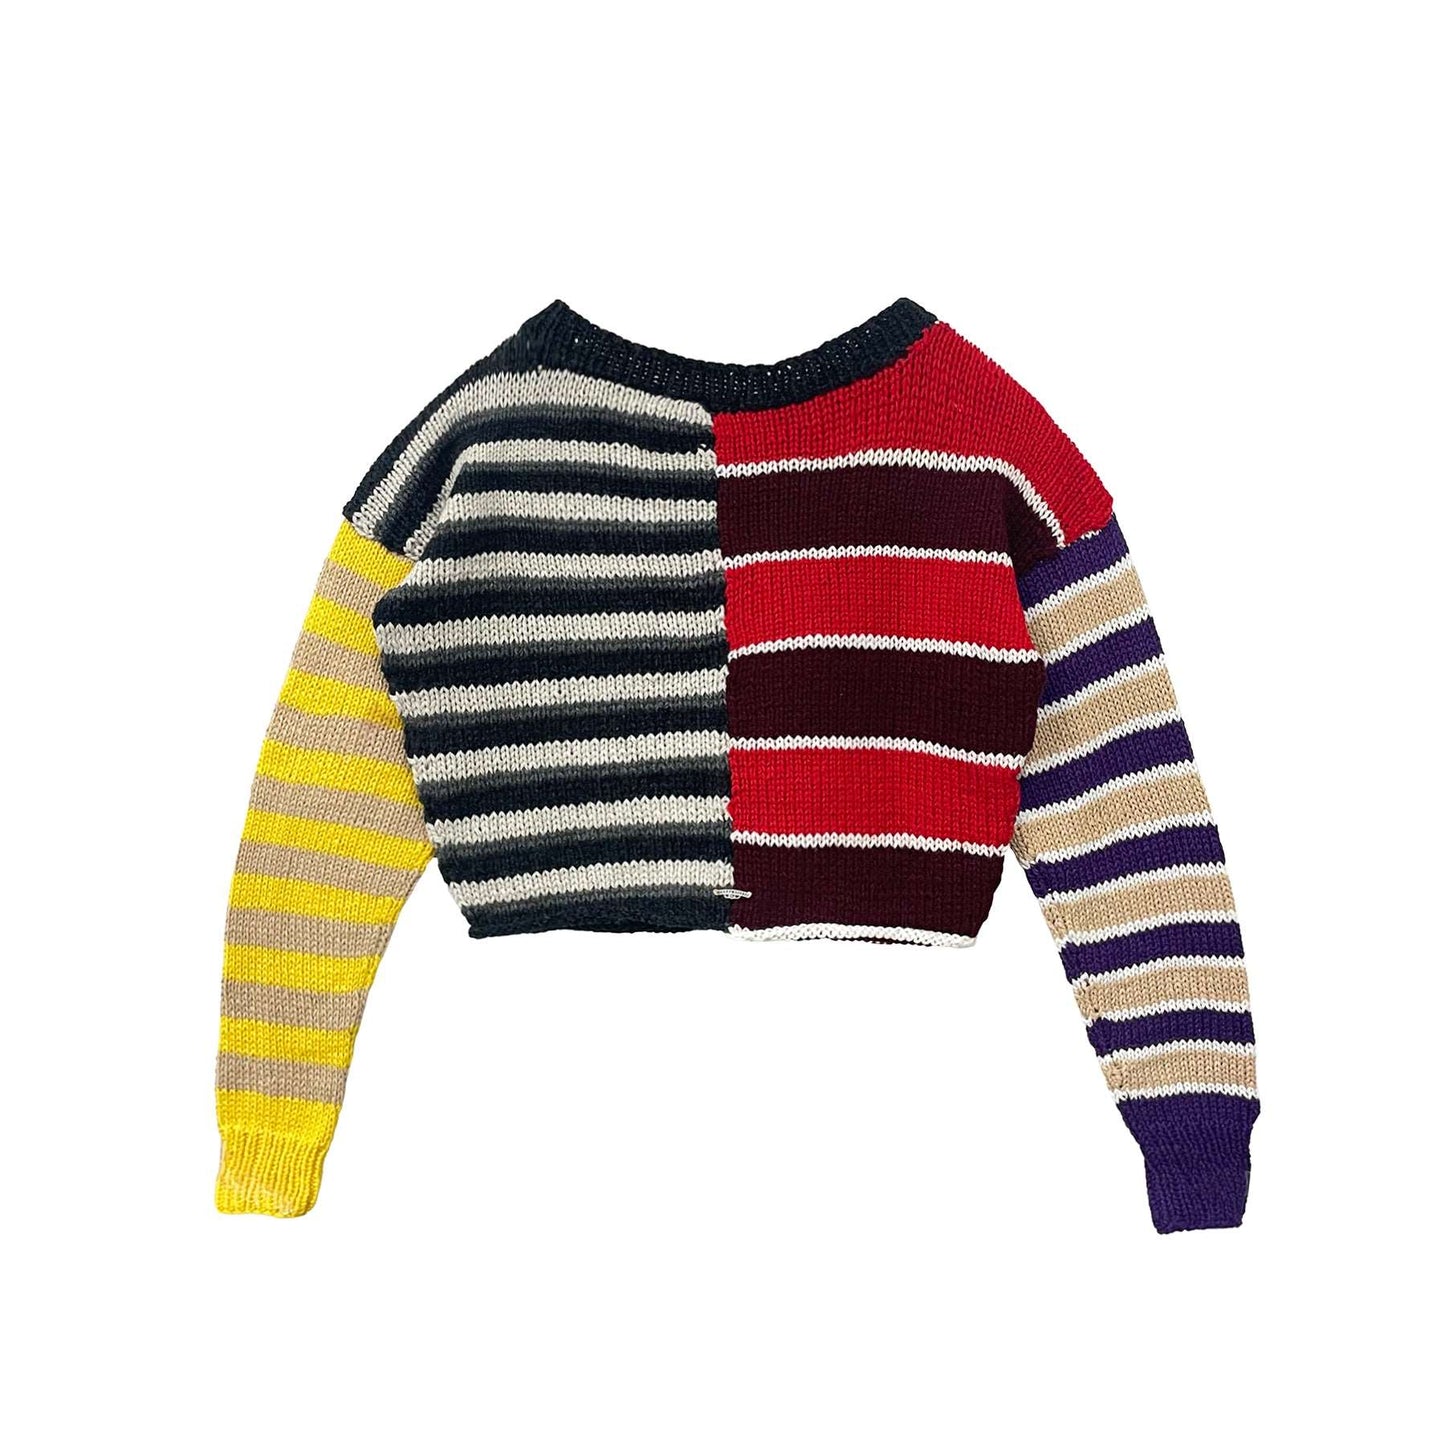 Chrome Hearts Cashmere Striped Patchwork Yellow Cross Leather Short Sweater - SHENGLI ROAD MARKET